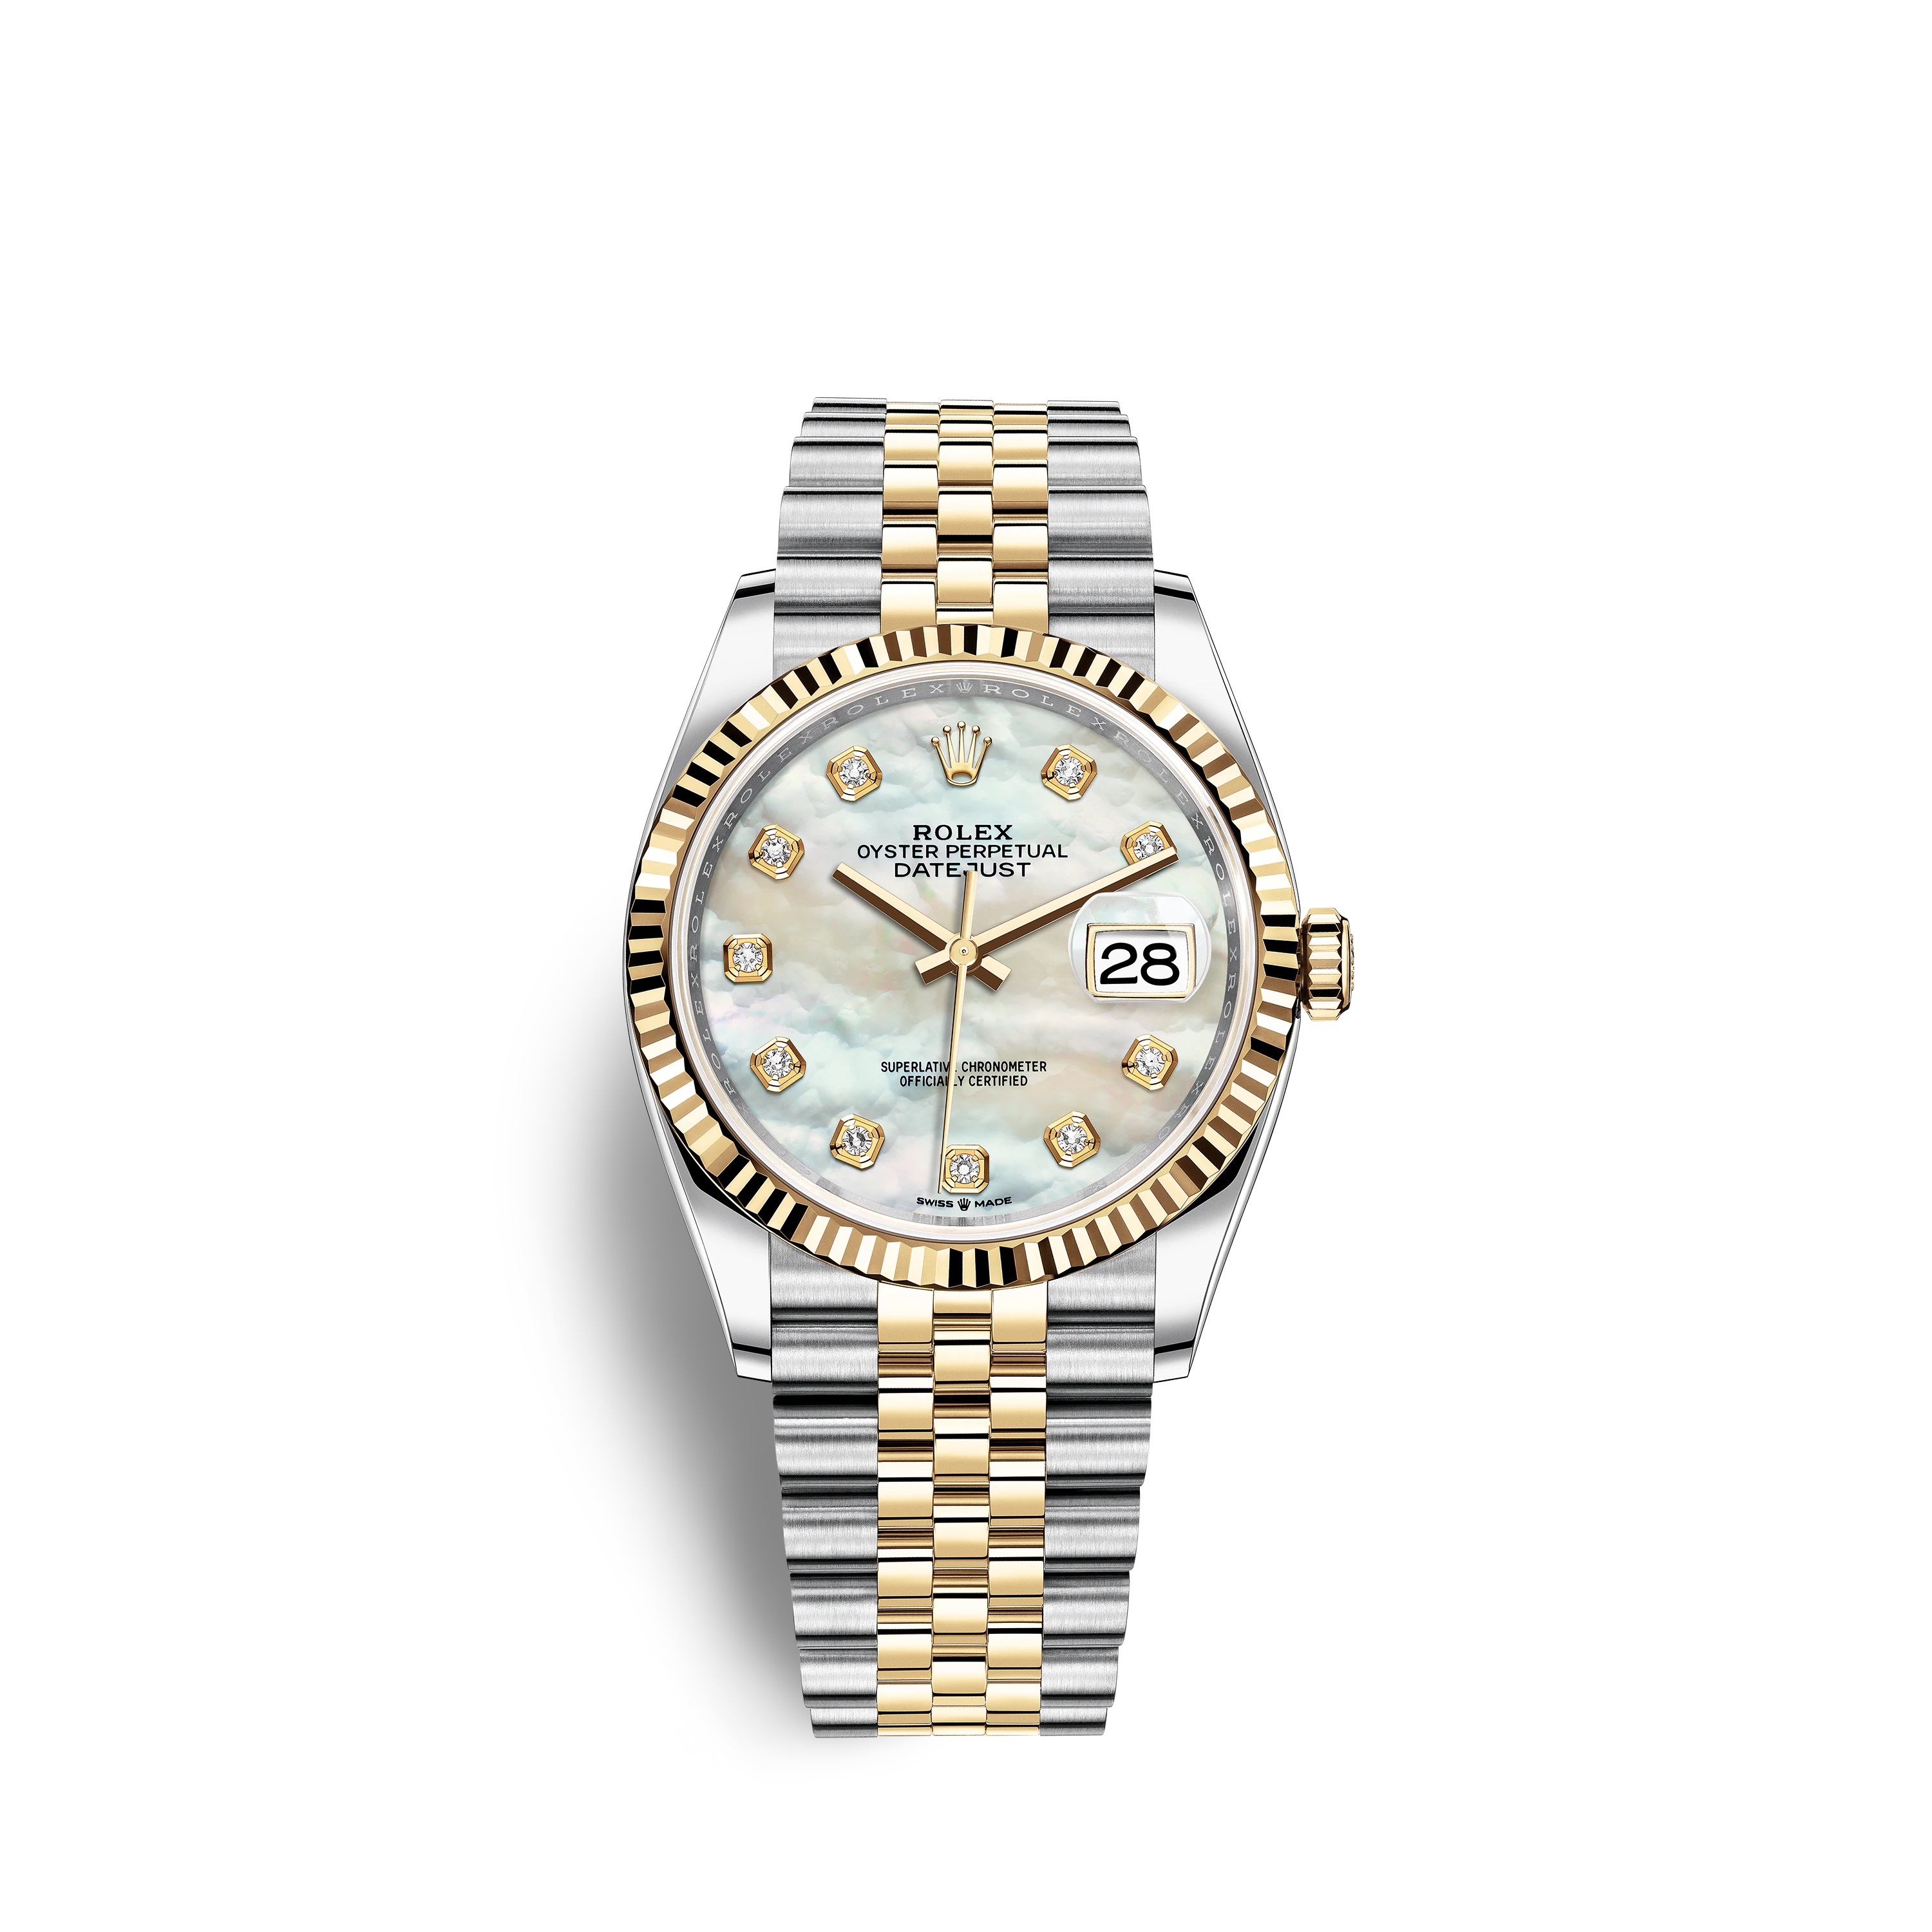 Datejust 36 126233 Gold & Stainless Steel Watch (White Mother-of-Pearl Set with Diamonds)